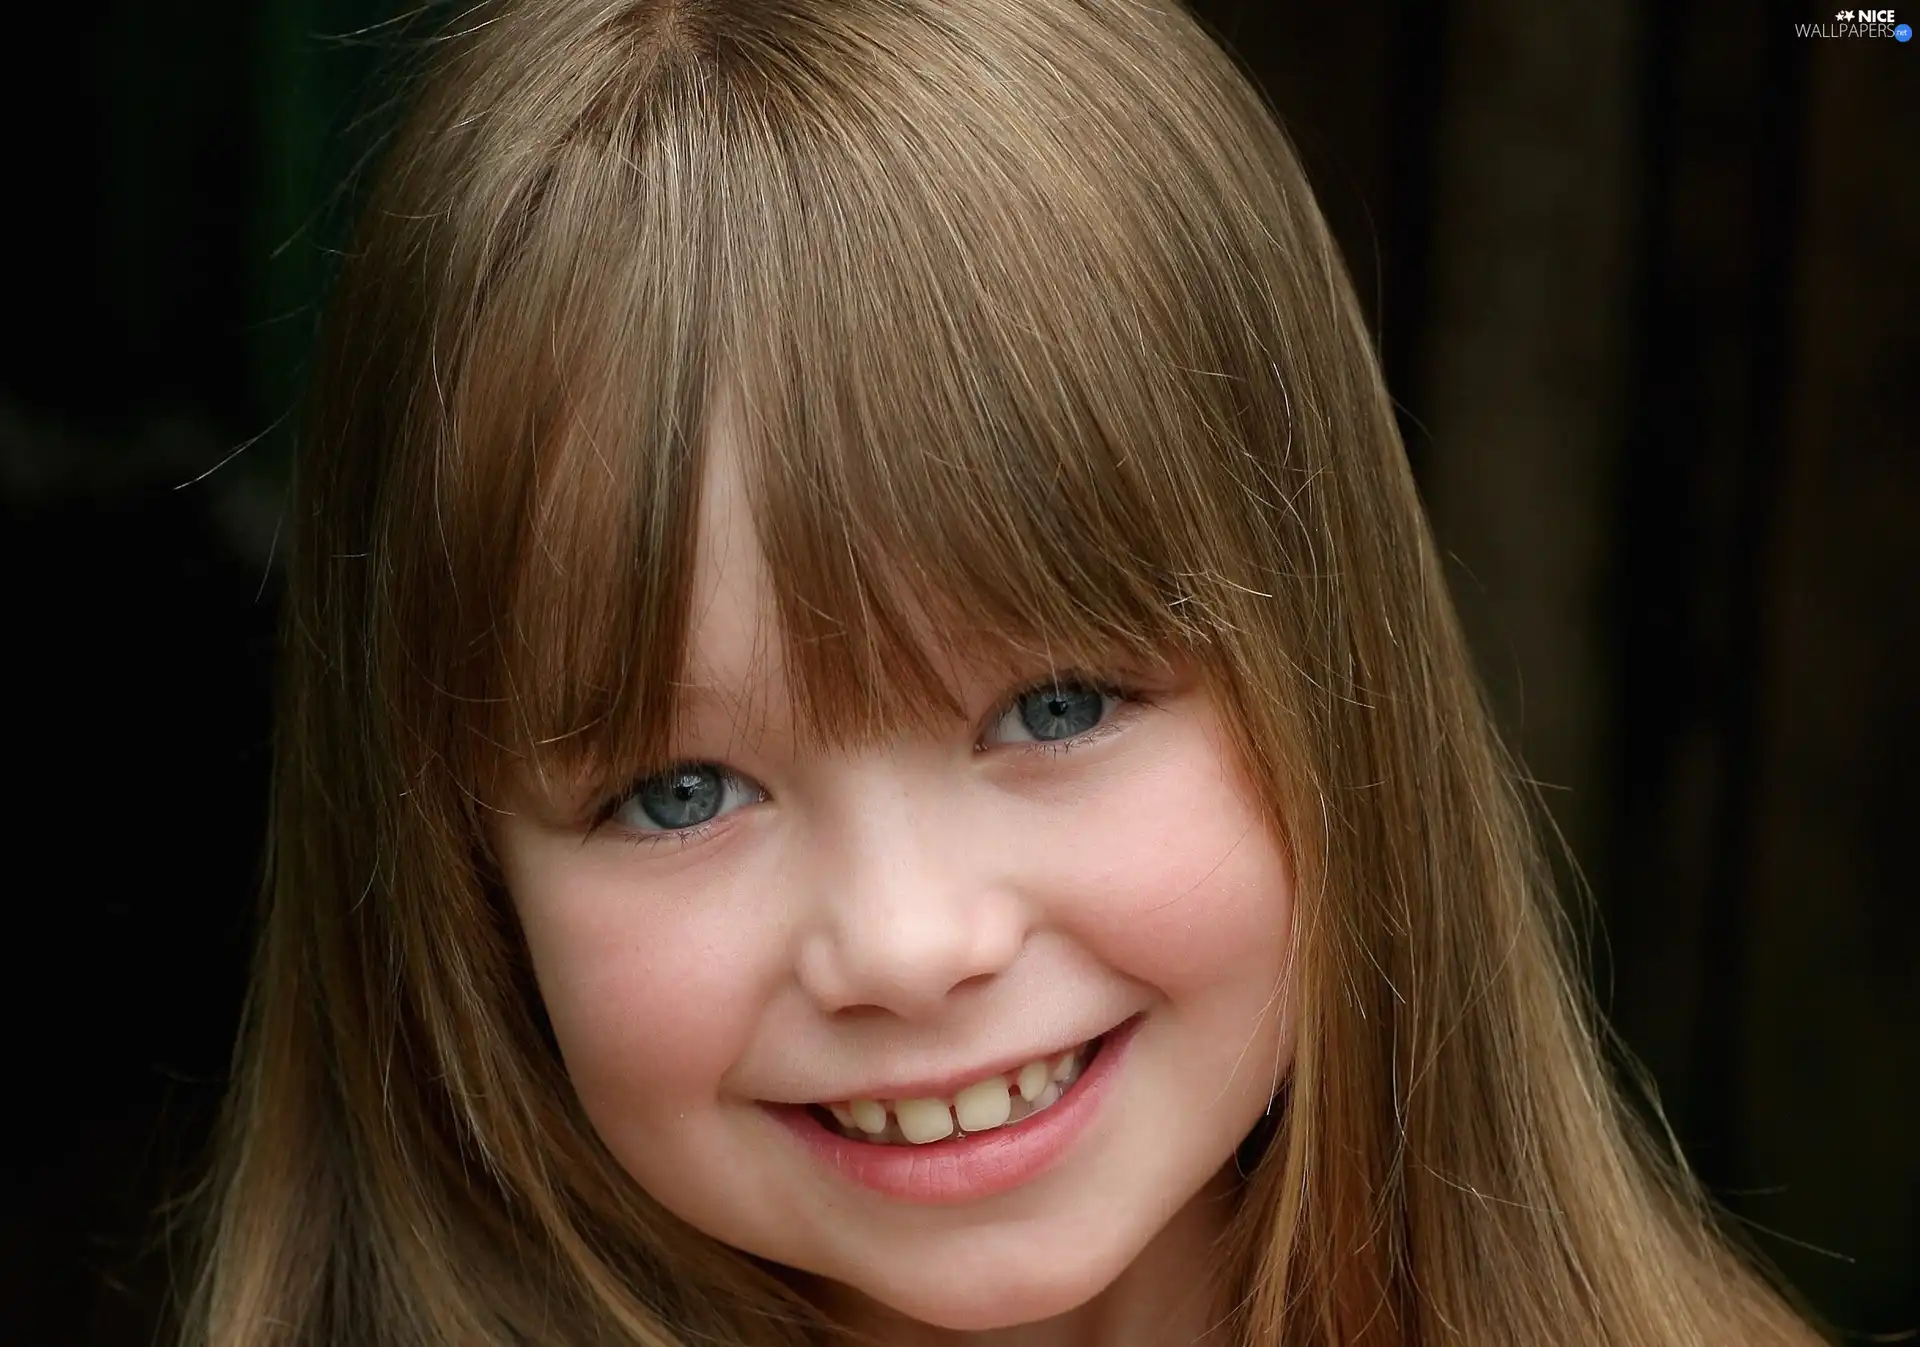 Connie Talbot Smile Bangs Songster Nice Wallpapers 2440x1712